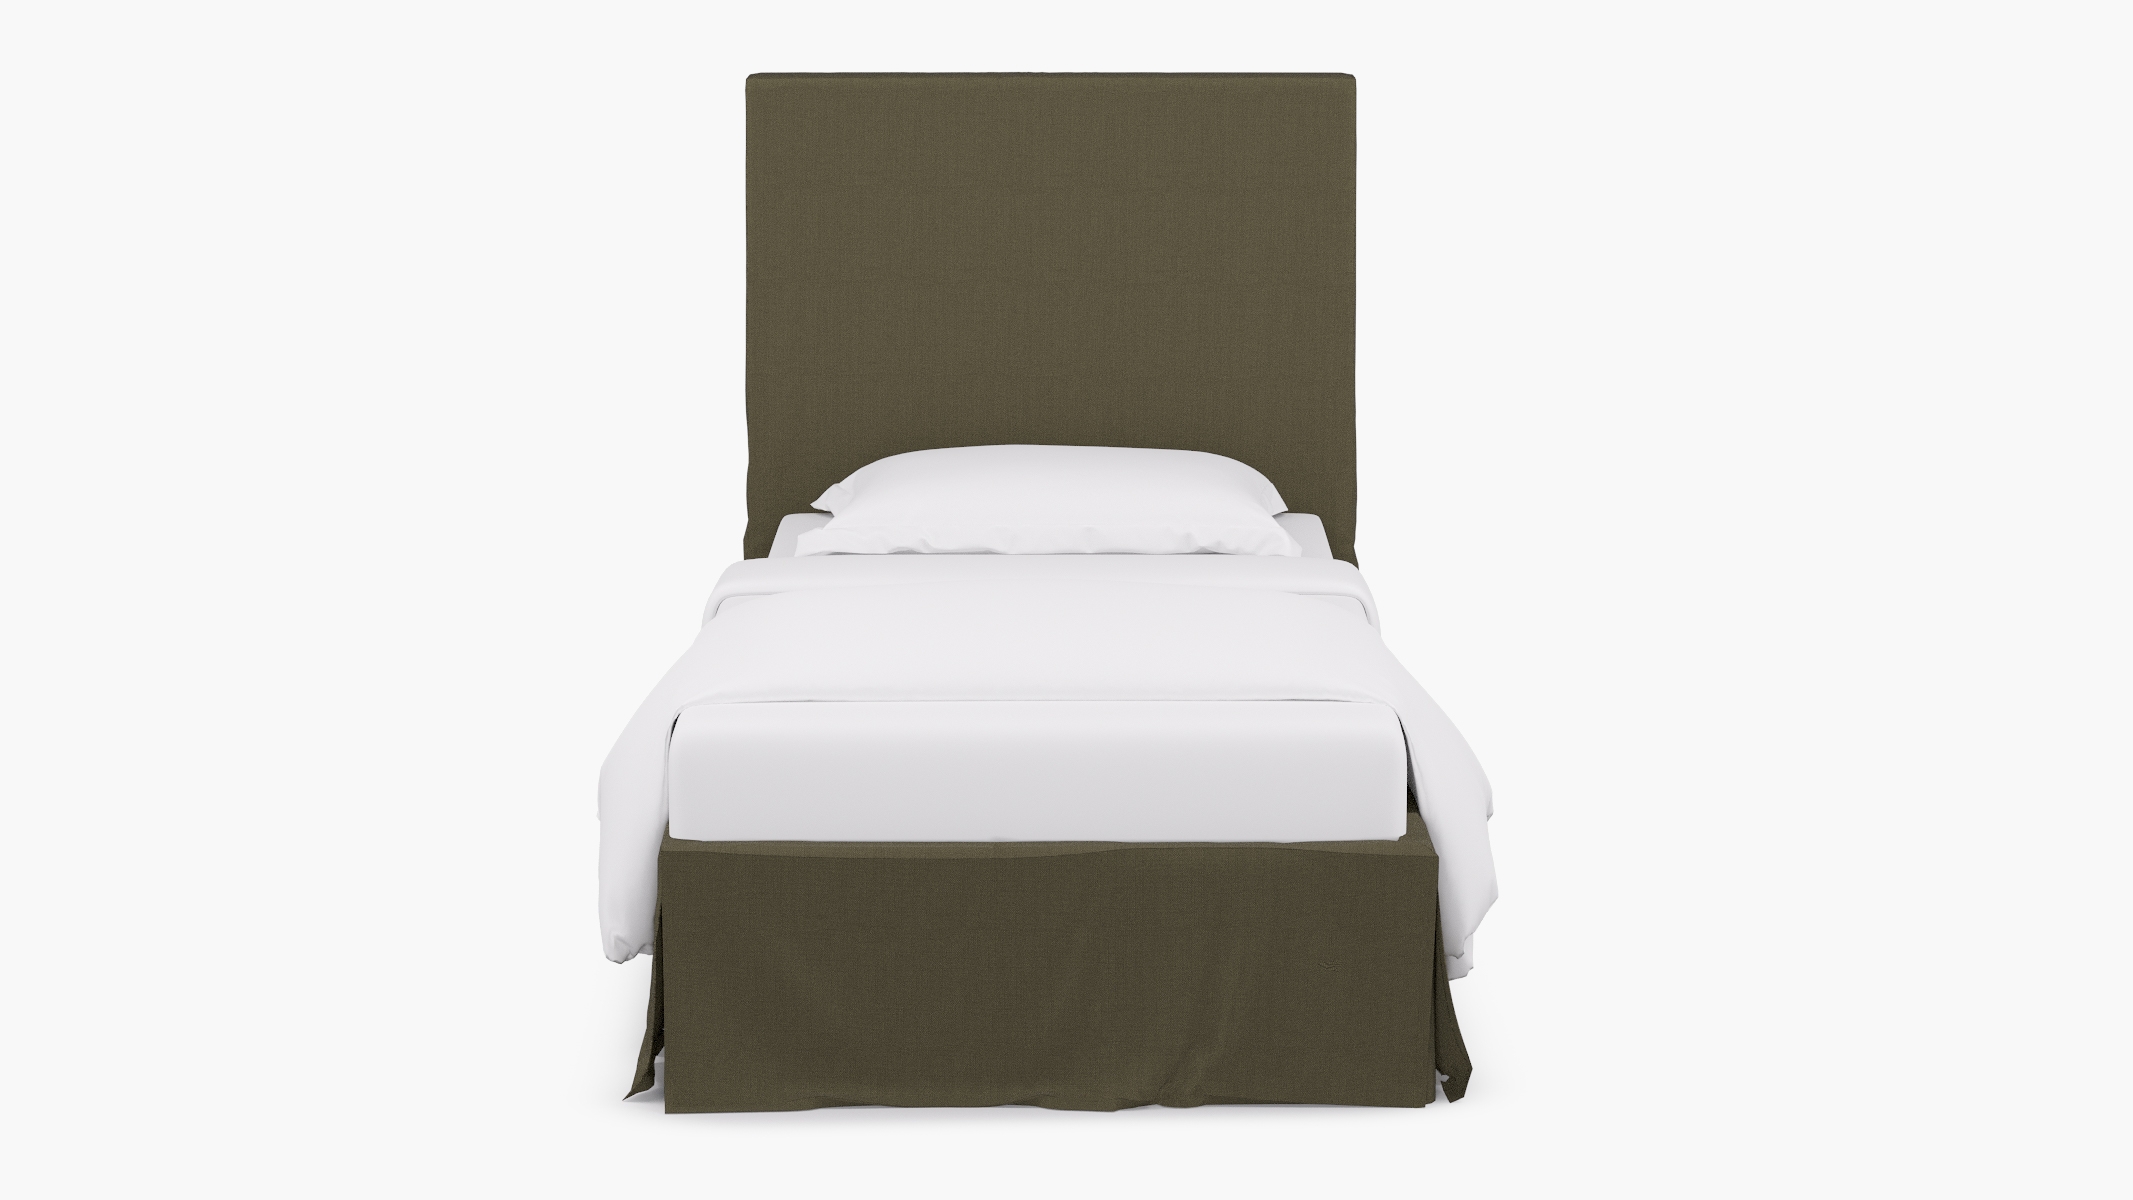 Slipcovered Bed, Olive Everyday Linen, Twin - Image 1